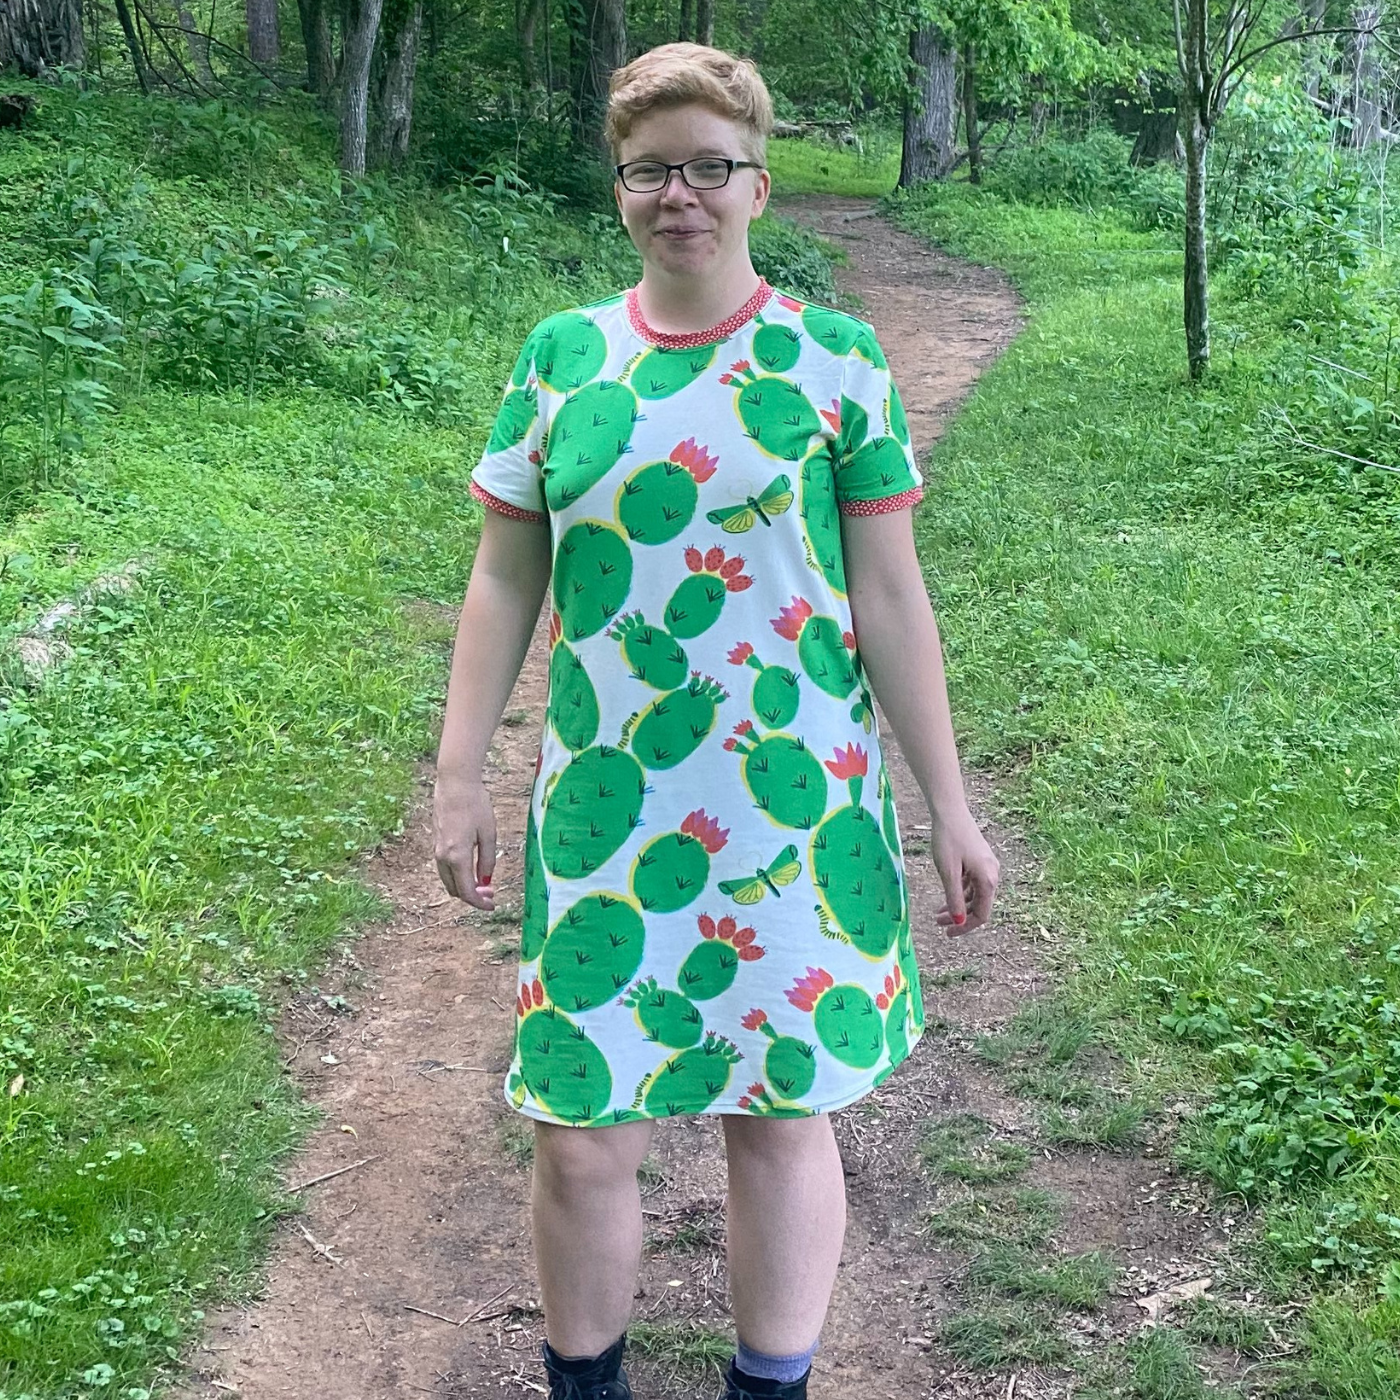 Bri stands in the middle of a dirt path going through the woods behind her. She is smiling at the camera and wearing a short-sleeved dress with a white background and a repeating green cactus design. The cacti have red blossoms and green-and-yellow moths floats near some of the blossoms. The sleeves and neckline have been ringed with red bias tape that has white dots.